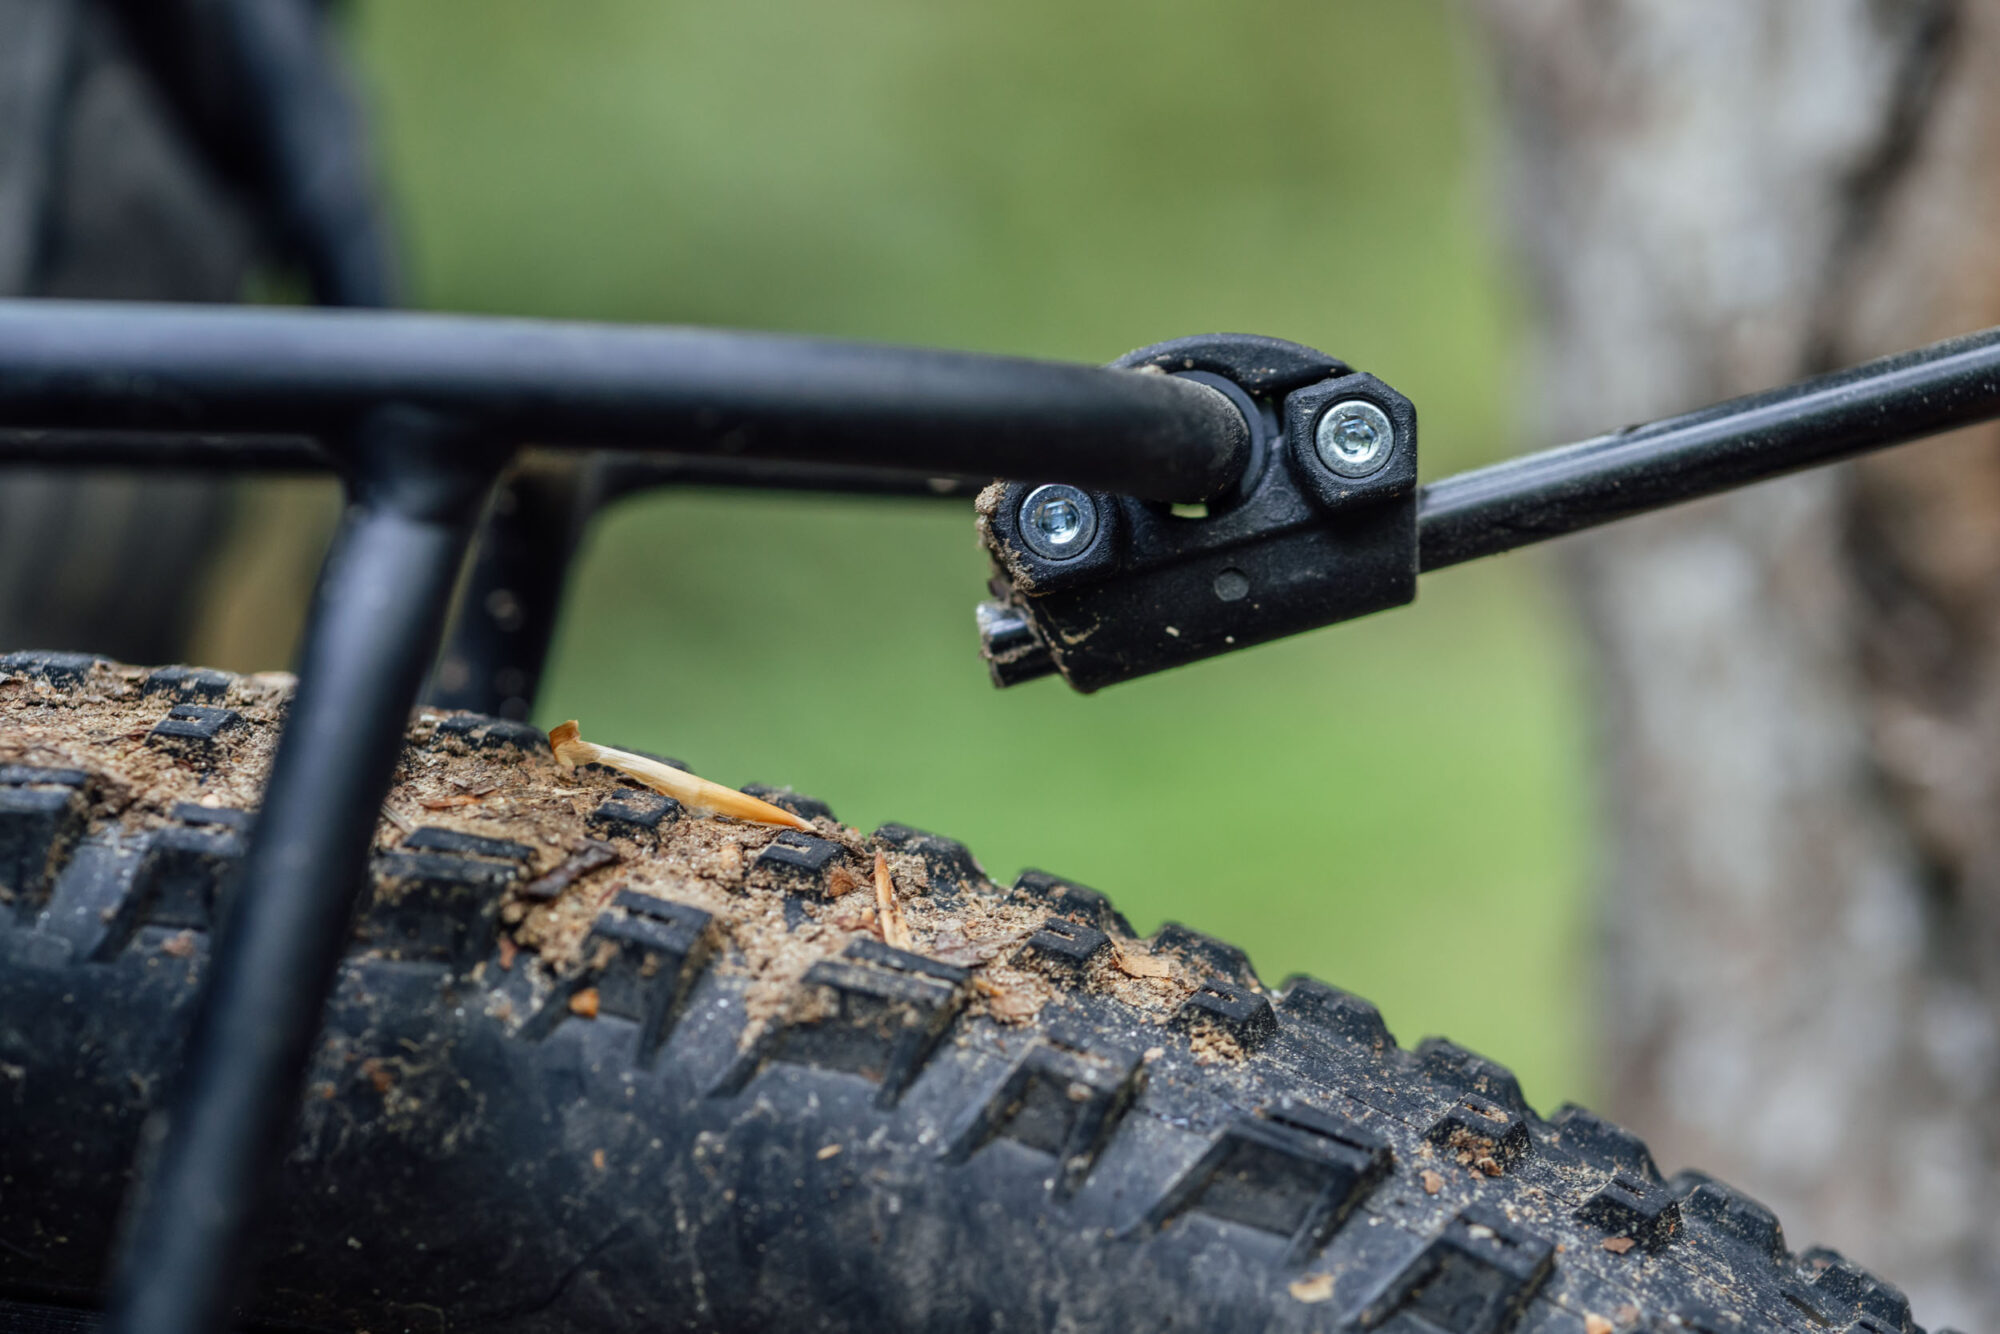 Ortlieb Quick Rack Review